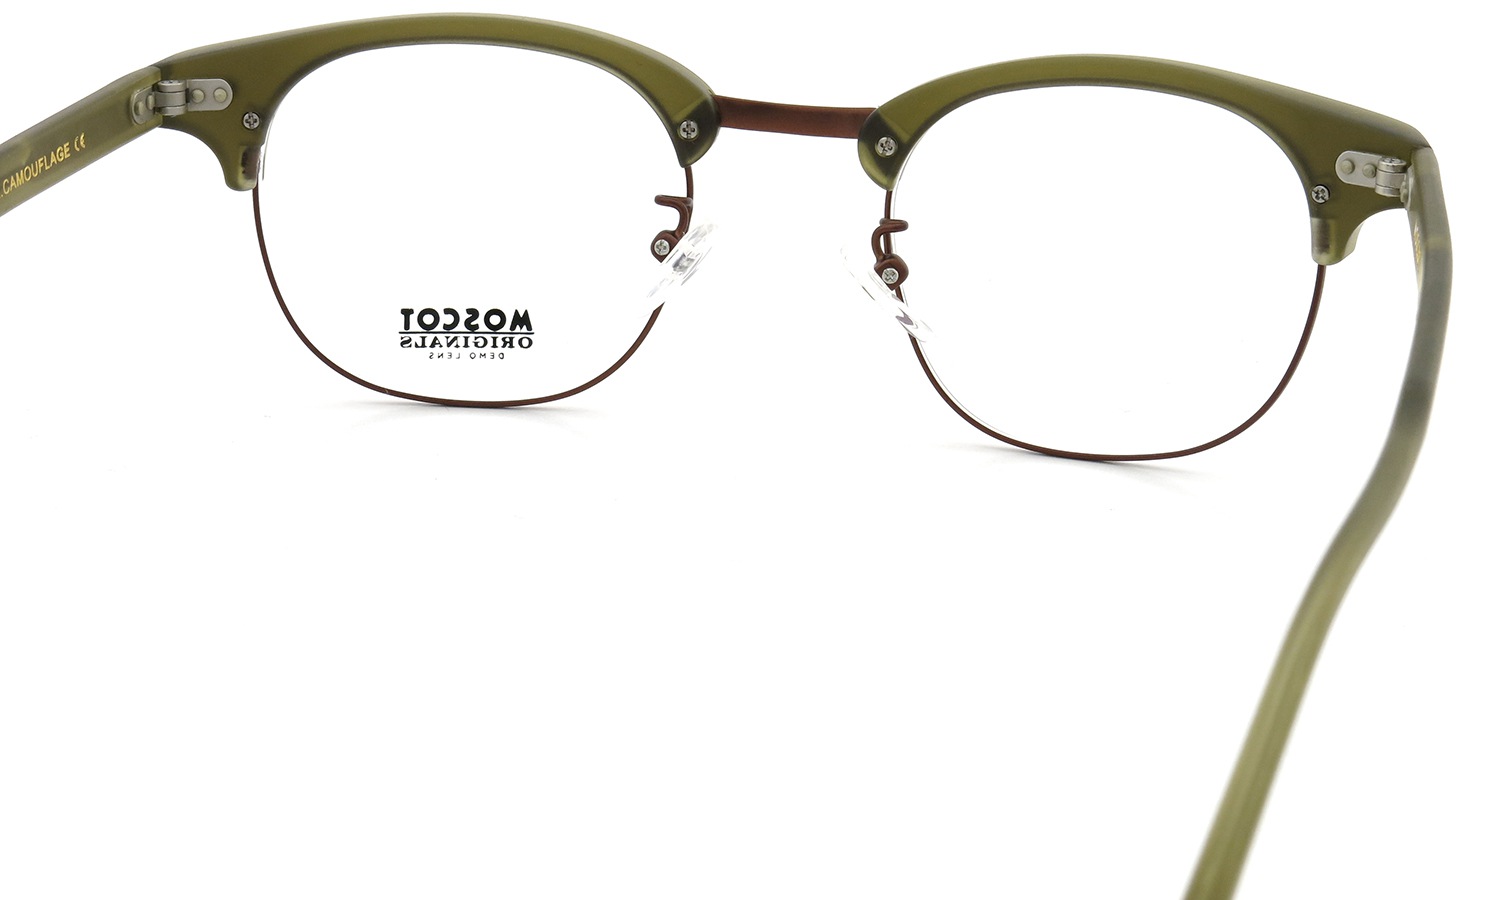 TODD SNYDER×MOSCOT コラボレーションメガネ YUKEL Col.CAMOUFLAGE 46size